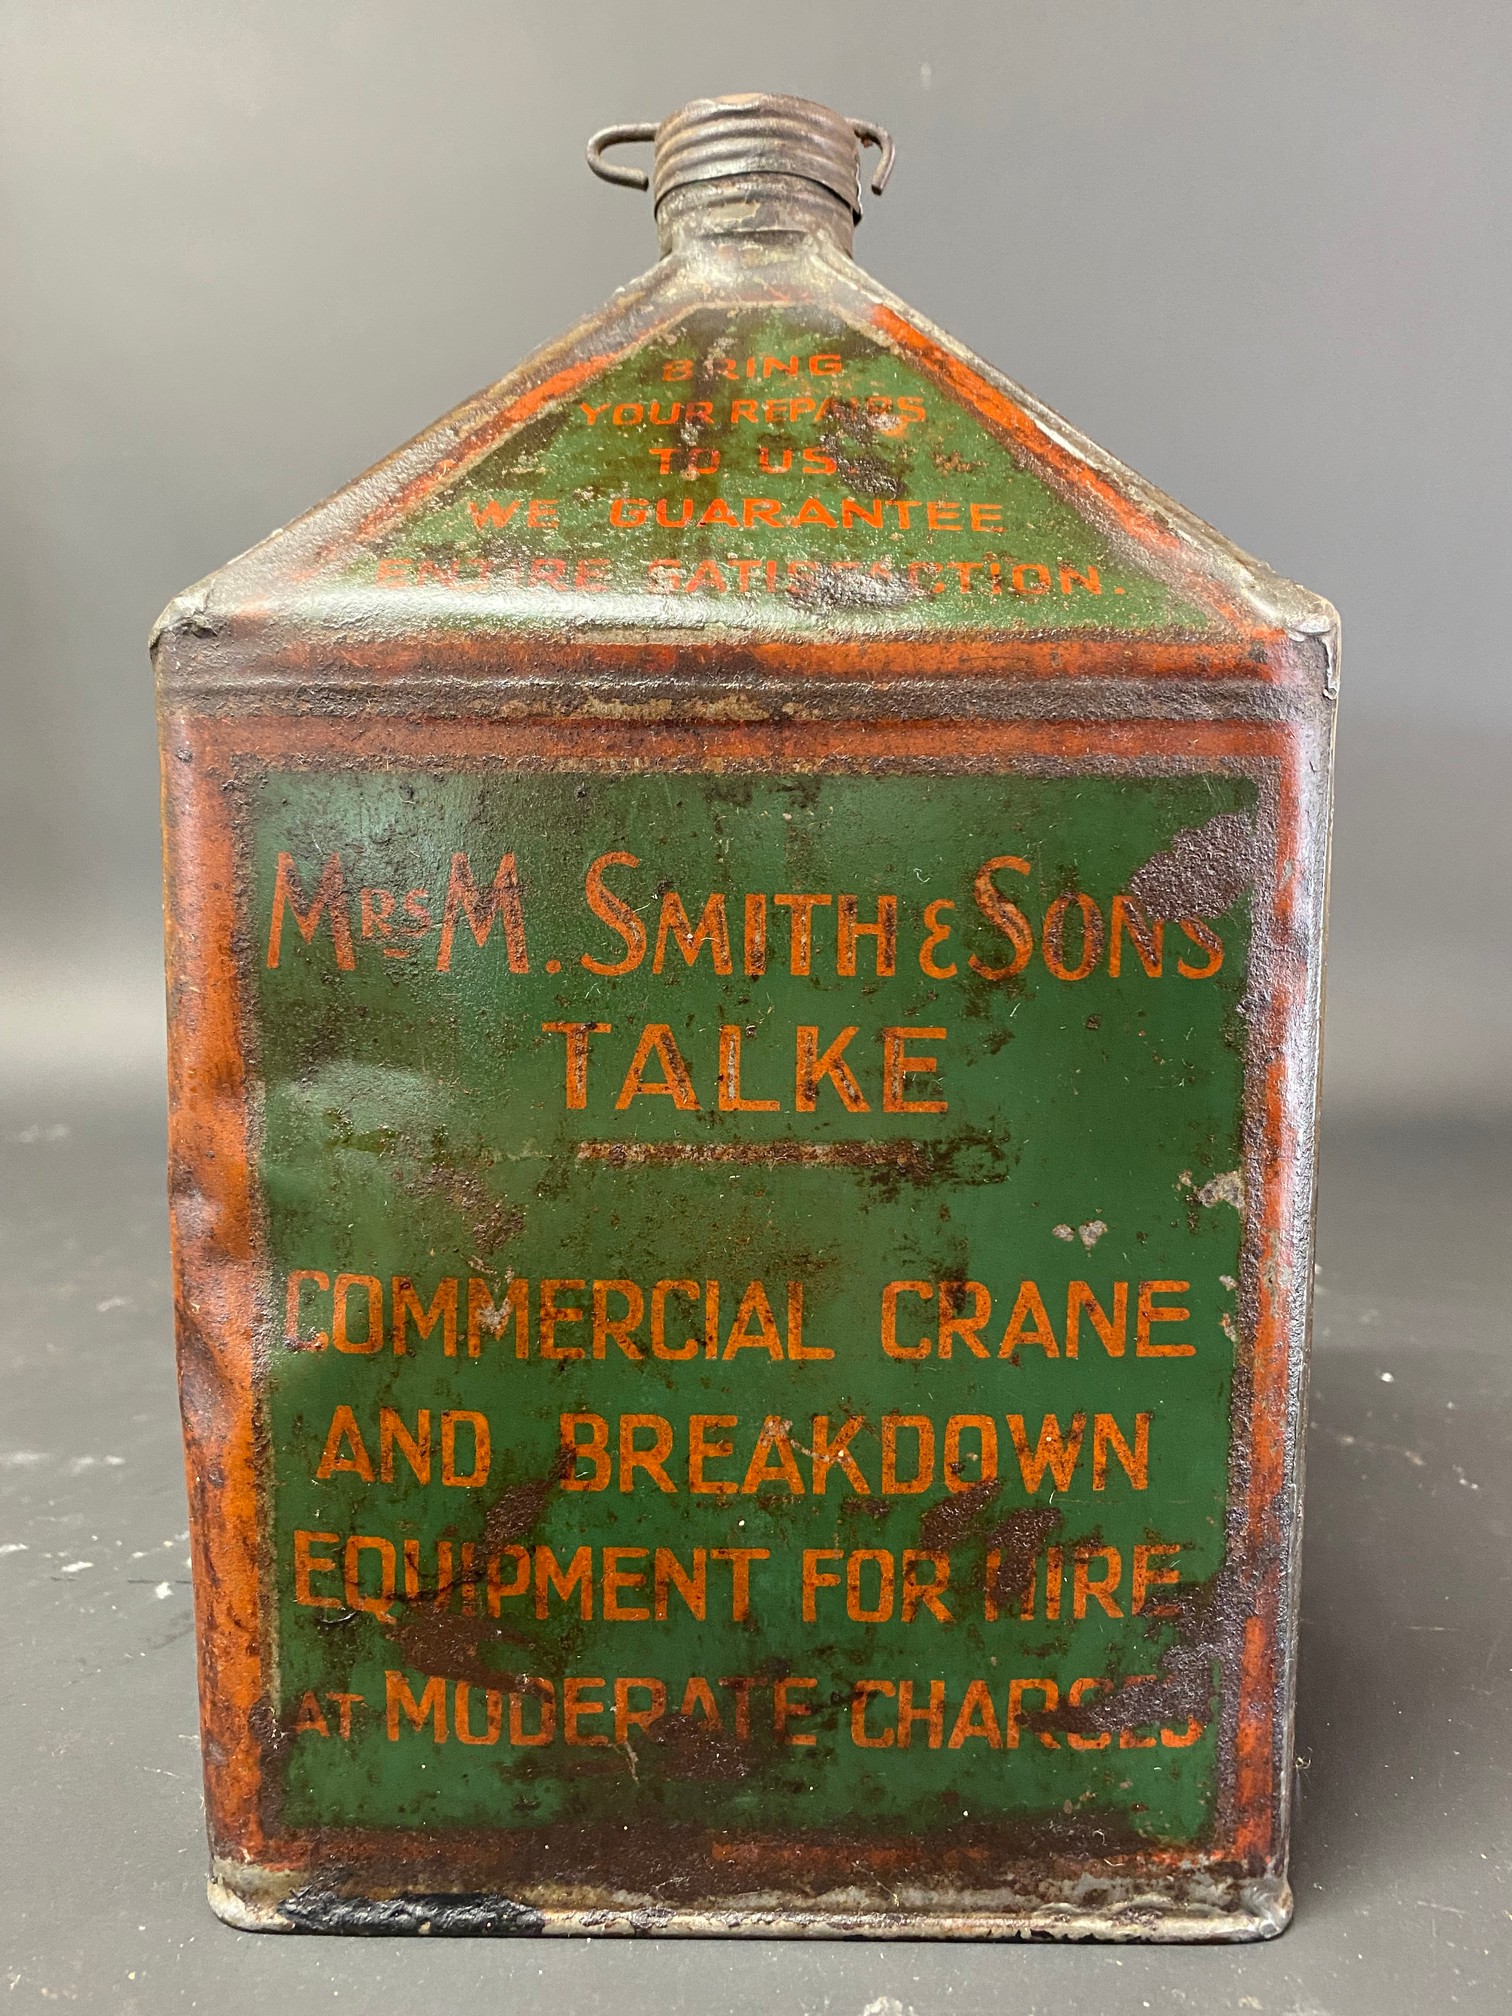 A Mrs M Smith & Sons of Talke Garage, Talke, Stoke on Trent Lubricating Oil gallon pyramid can.